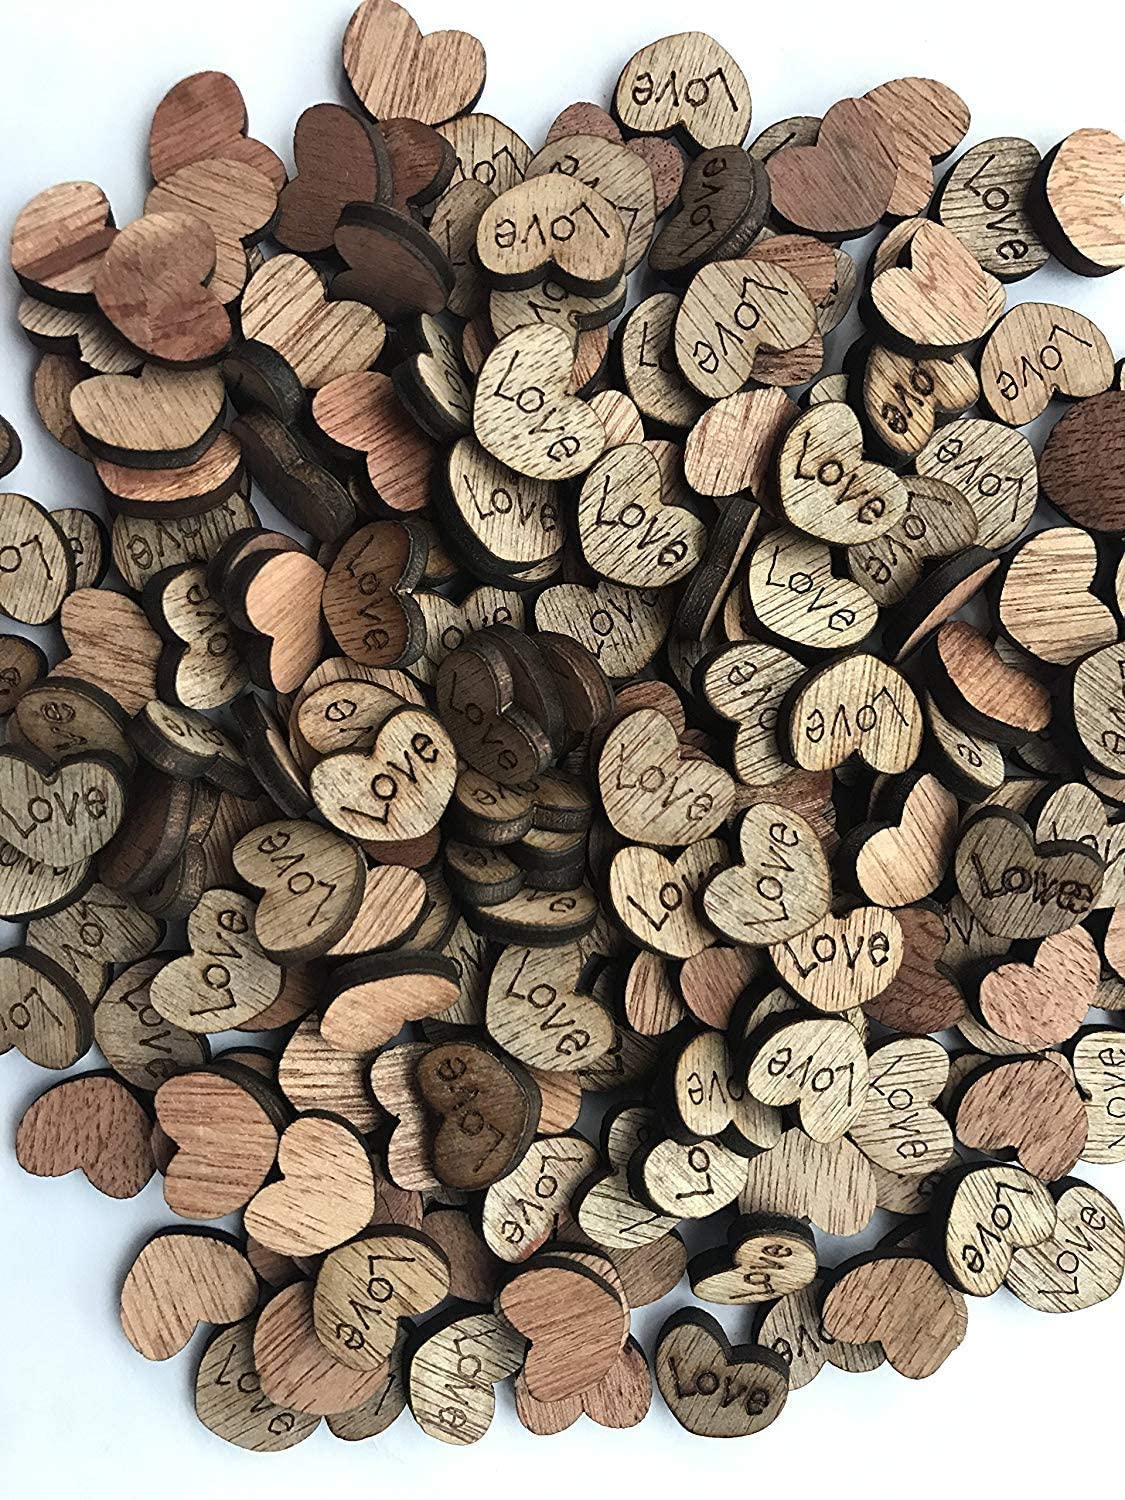 100pcs Rustic Wooden Love Heart Wedding Table Scatter Decoration Crafts Children's DIY Manual Patch